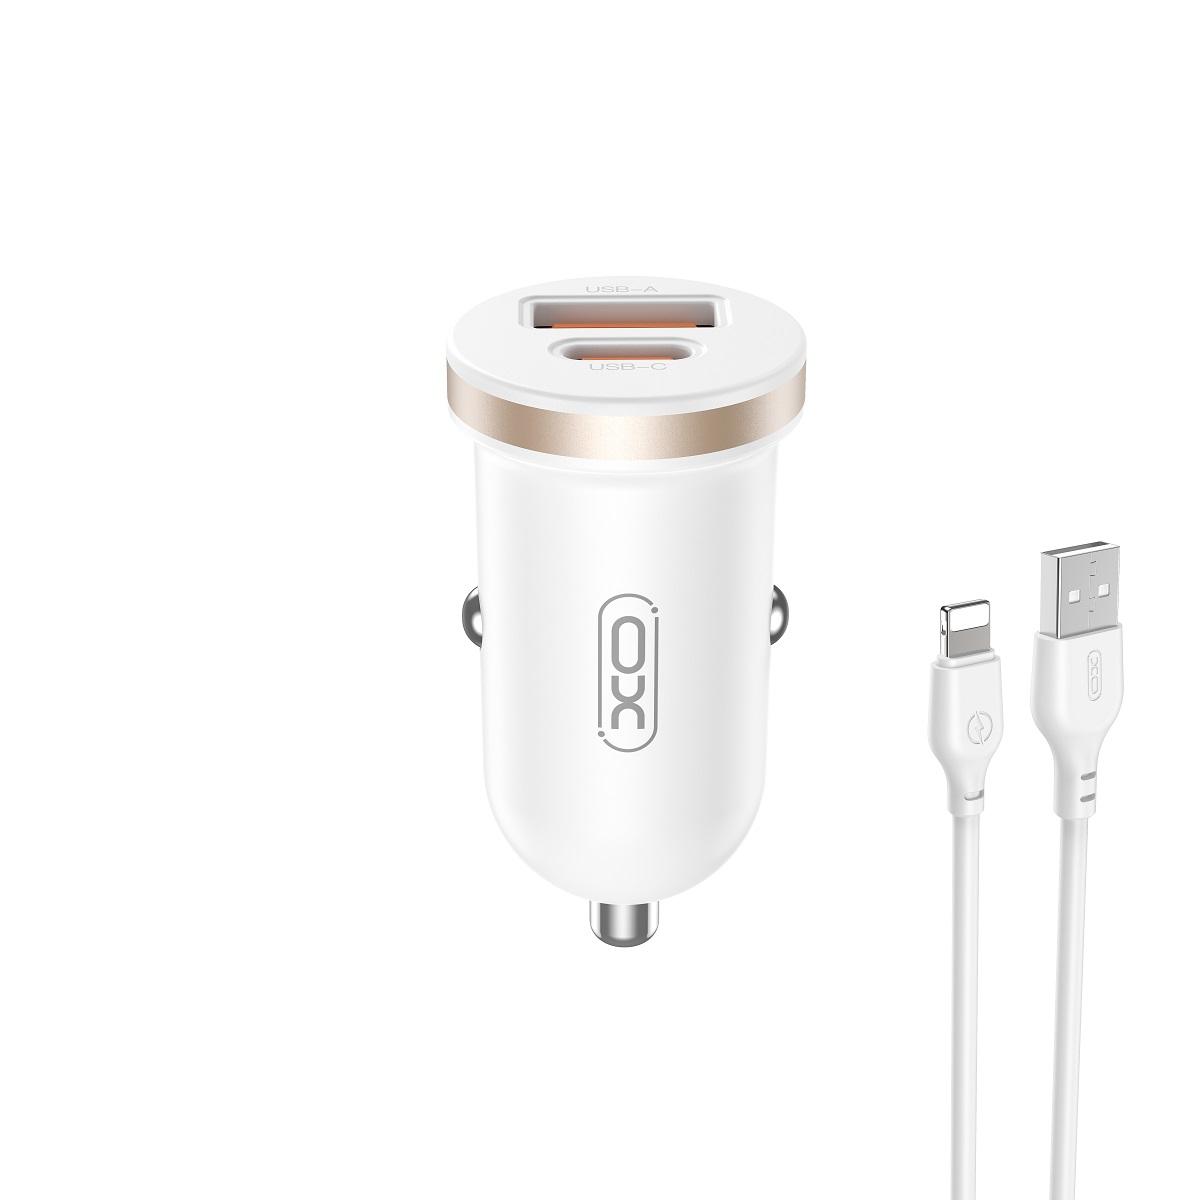 XO car charger CC56 PD 30W QC 1x USB 1x USB-C white + USB - Lightning cable